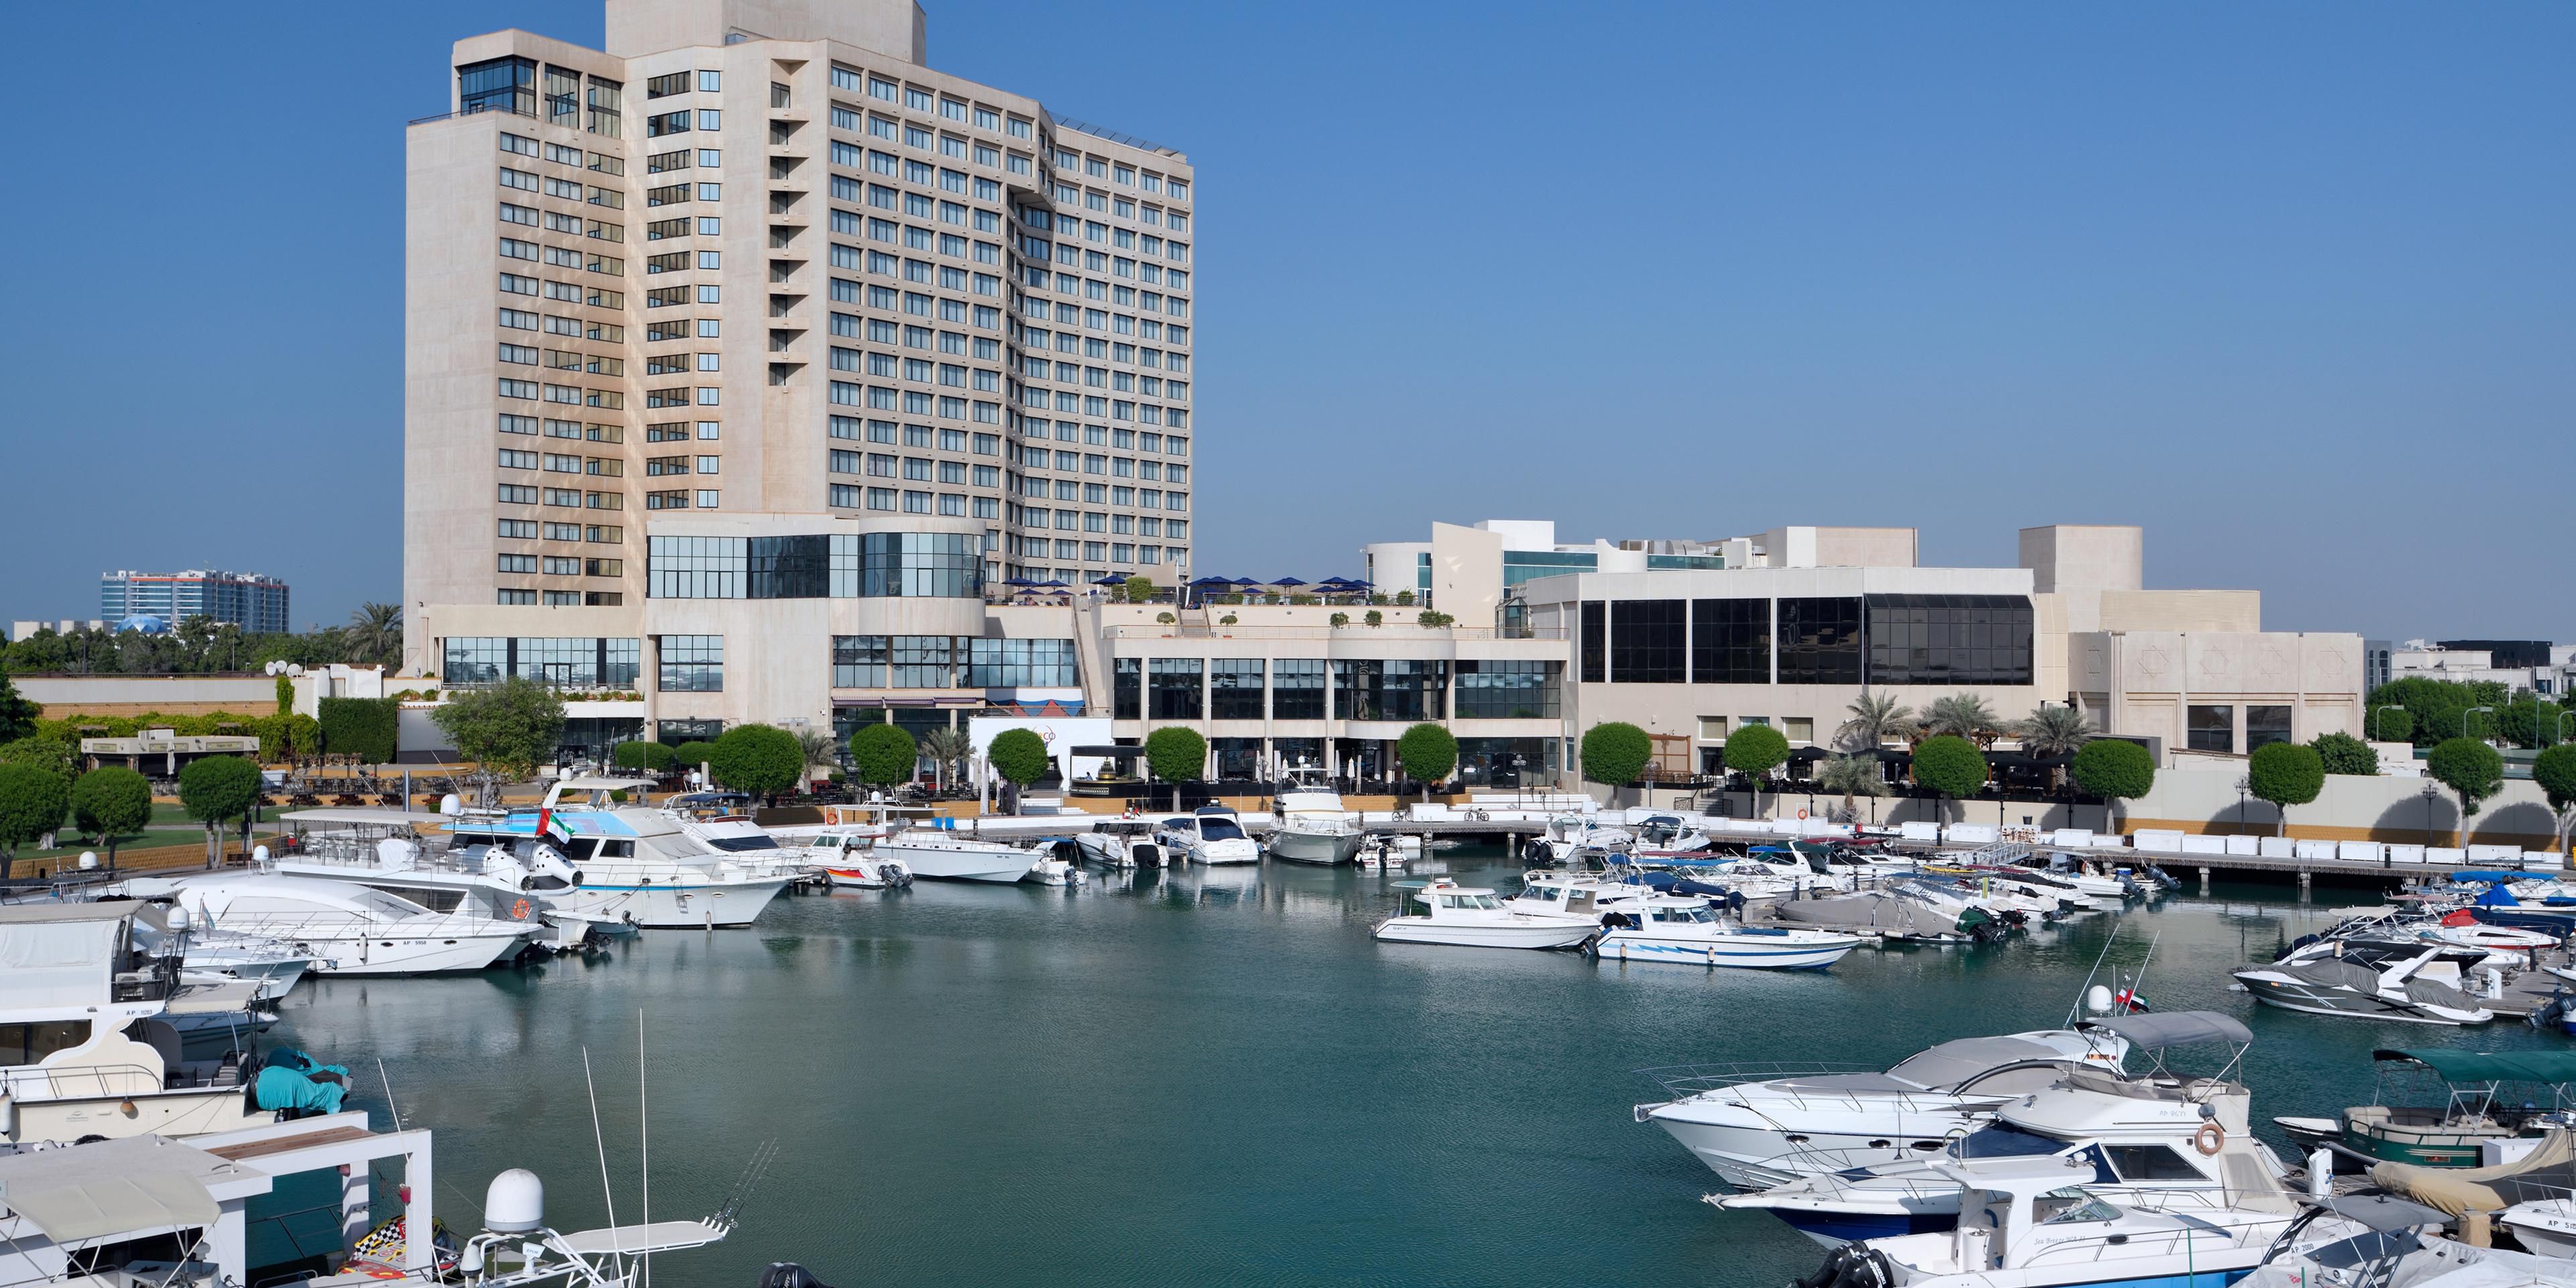 The InterContinental Marina is part of our facilities offering, with berthing spaces for 183 yachts up to 65 feet in size. Join this exclusive marina and enjoy a wide range of benefits.